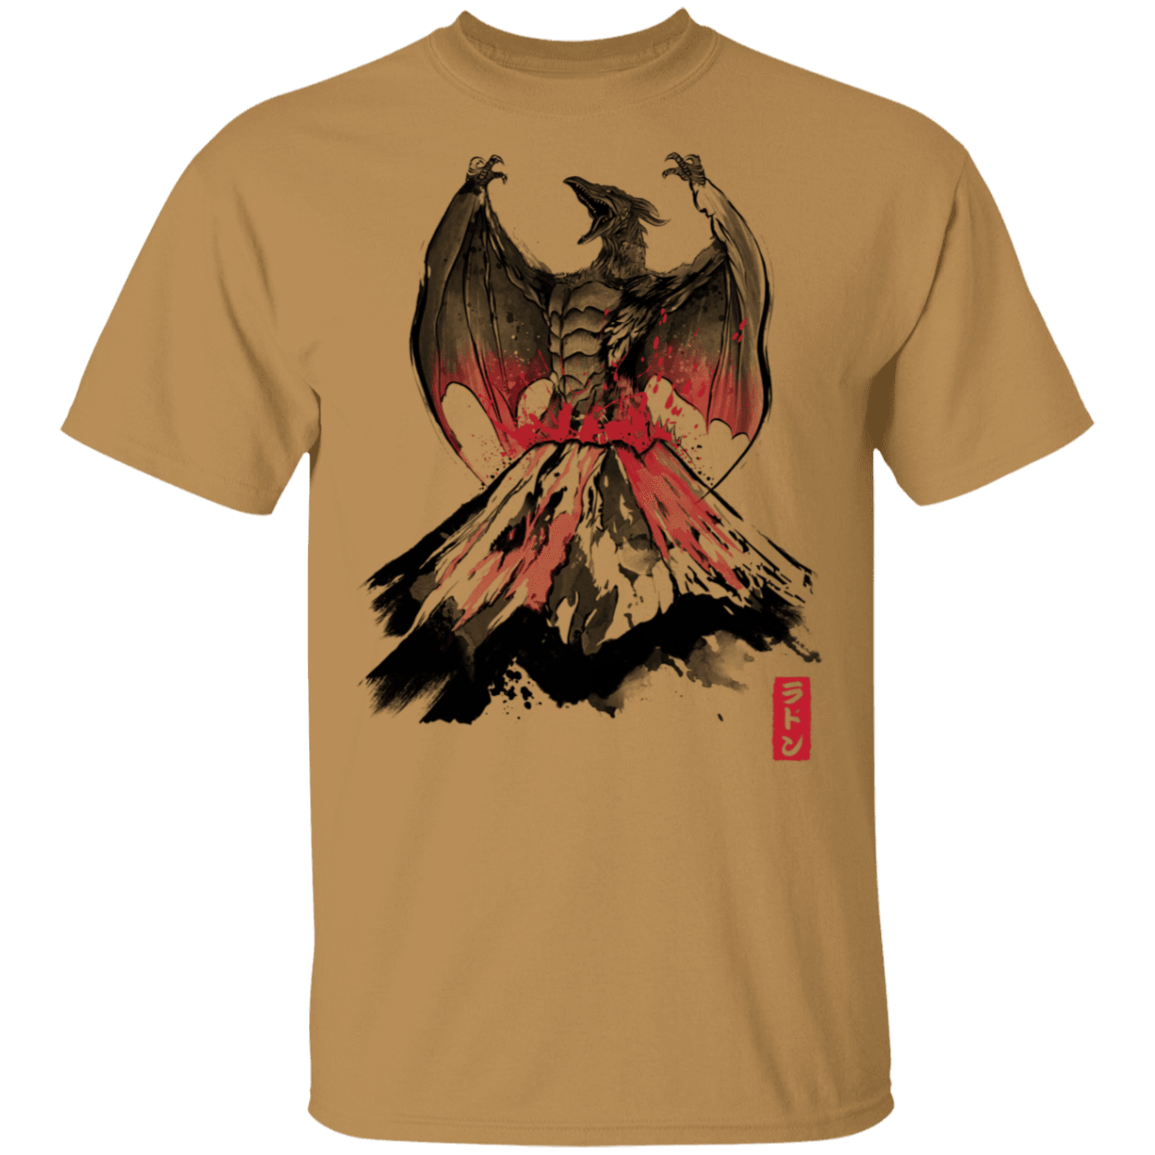 T-Shirts Old Gold / S The Rise of the Fire Pteranodon T-Shirt